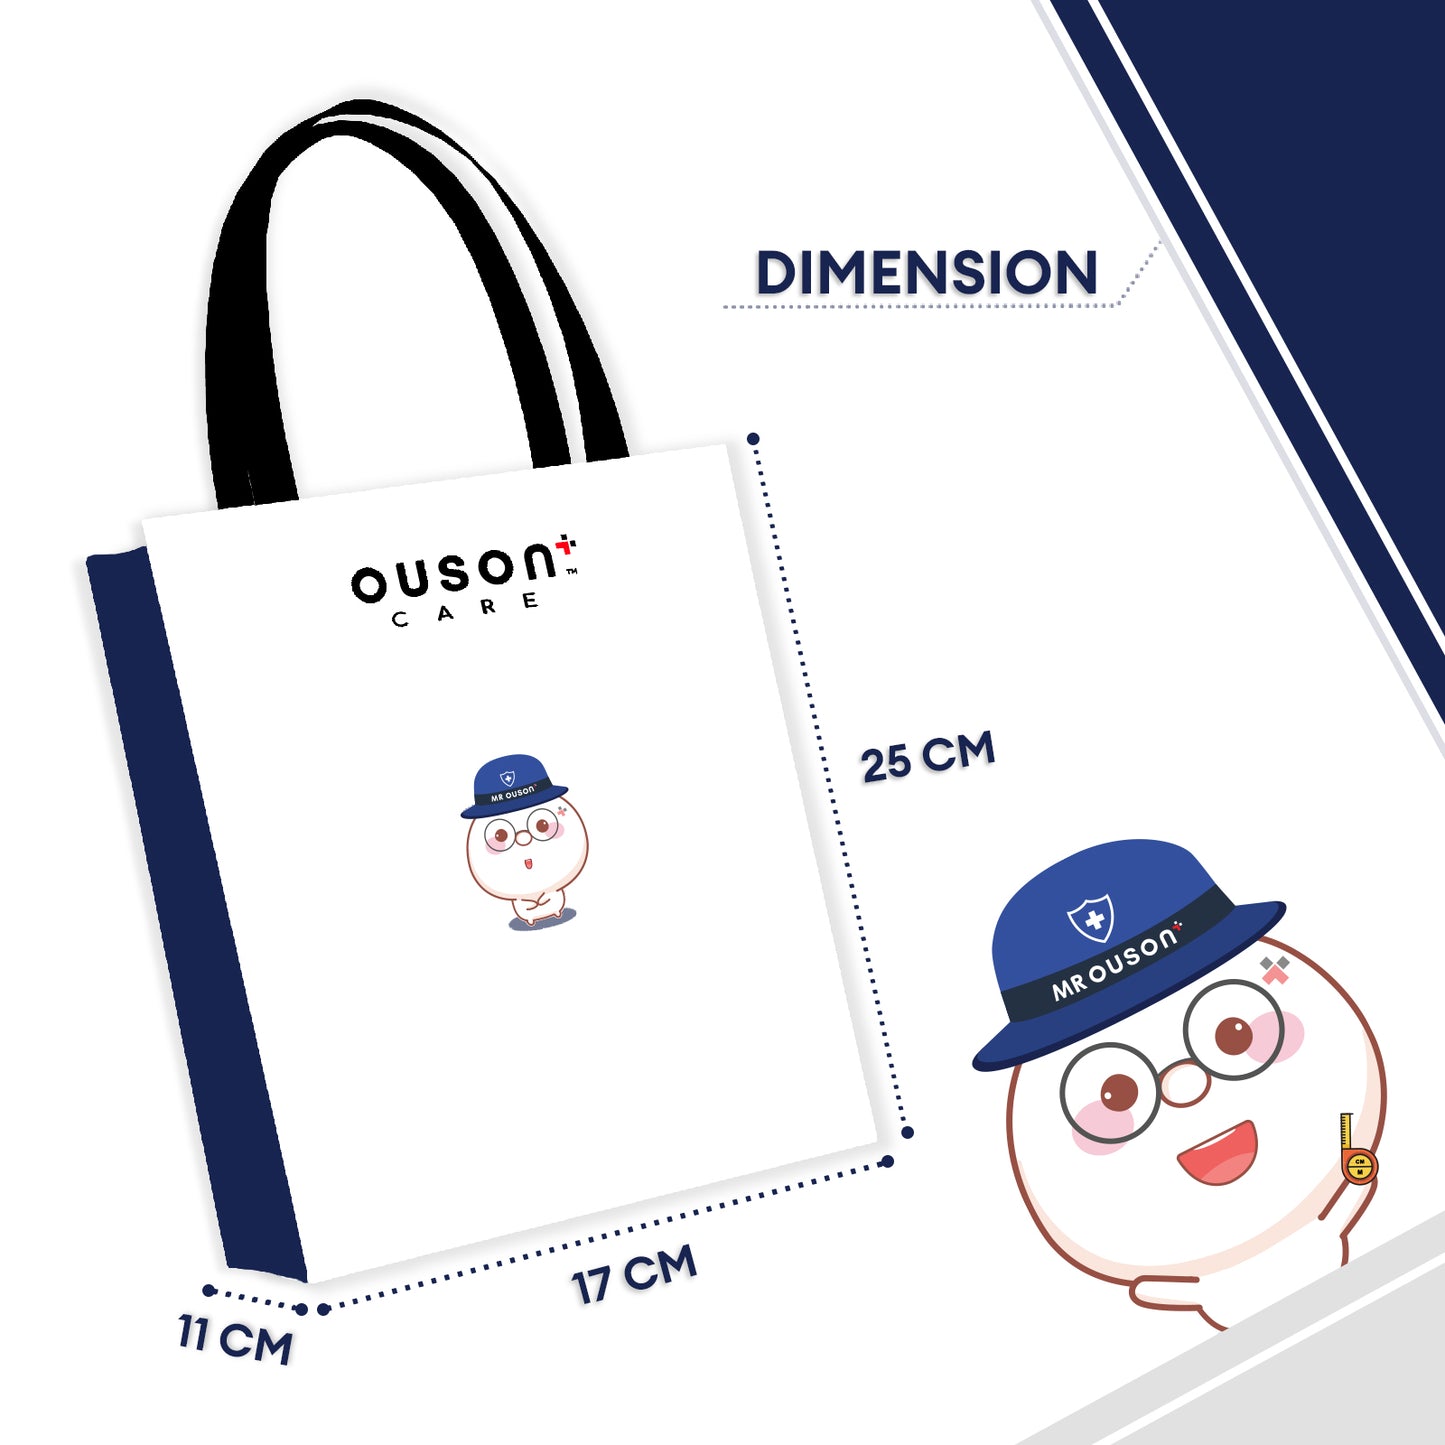 Mr Ouson Exclusive Tote Bag